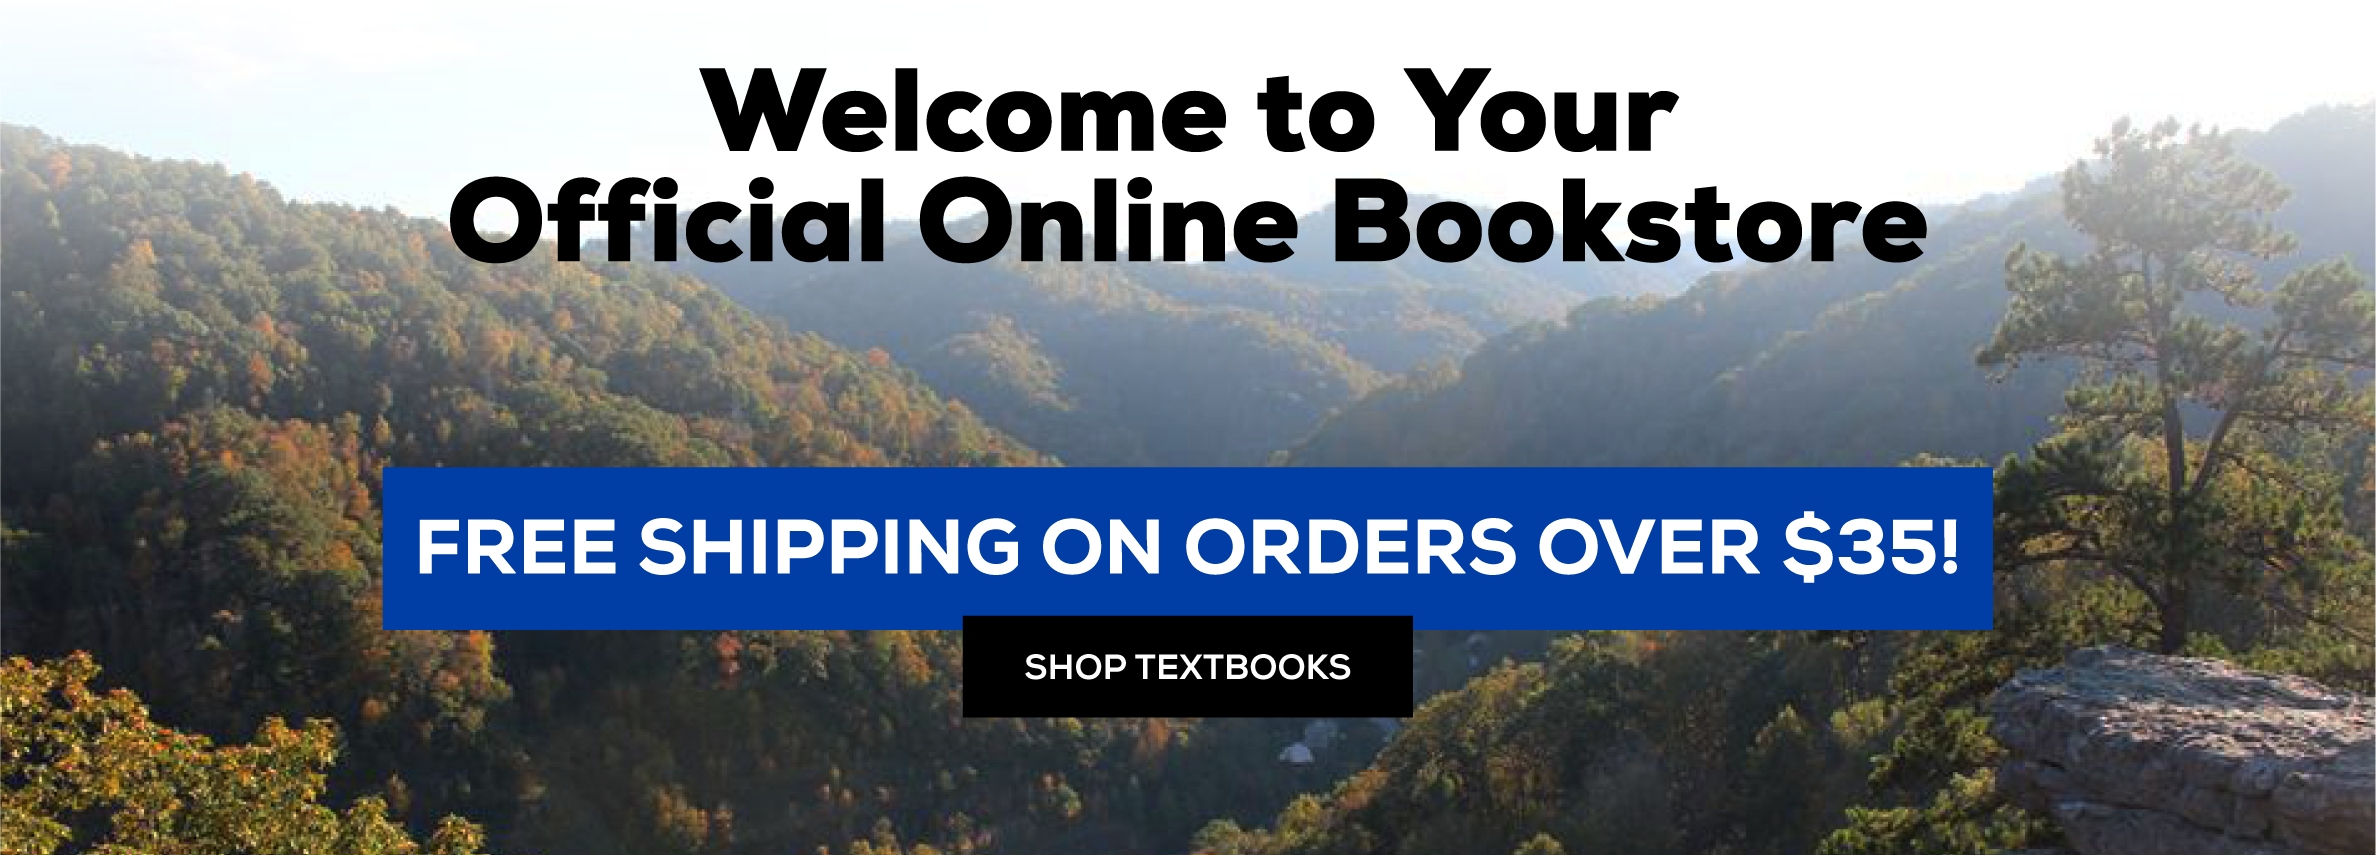 Welcome to your official online bookstore. Free shipping on all order over $35!  Excludes Marketplace Purchases. Shop textbooks